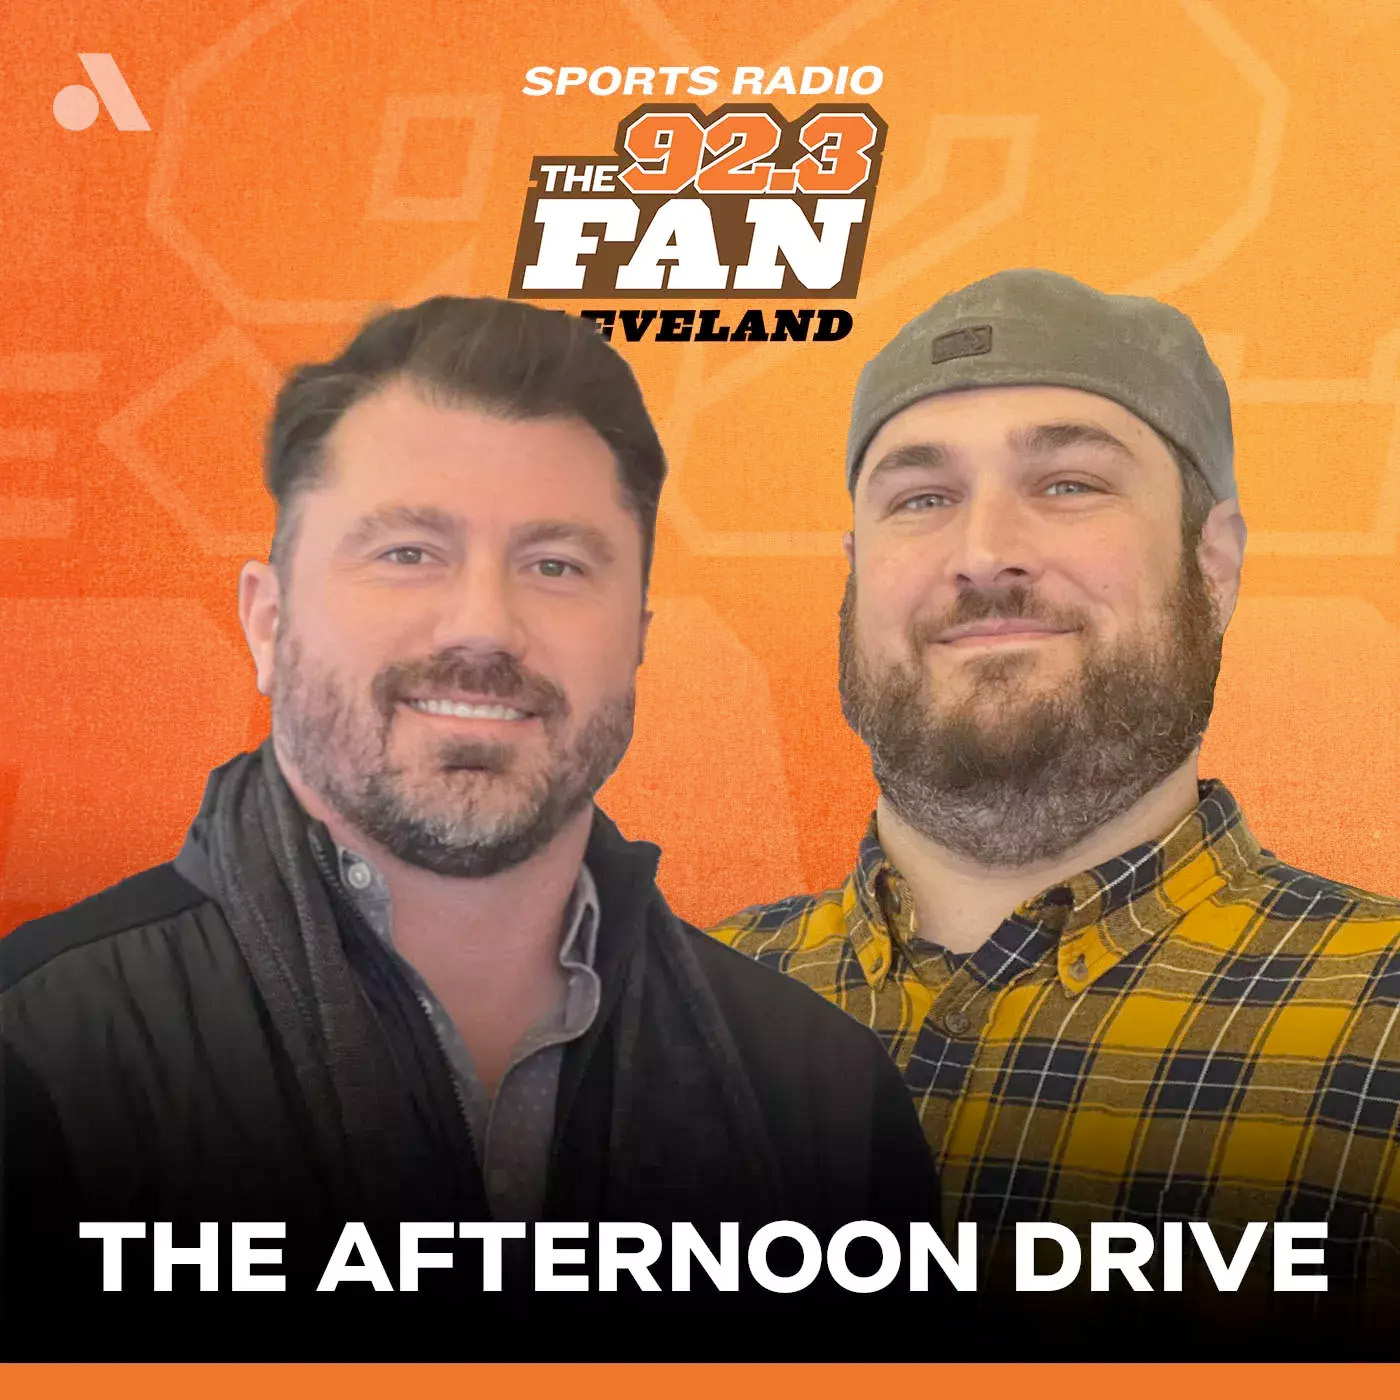 Bull & Fox discuss Browns' matchup with Patriots, Ravens loss and the wide open AFC